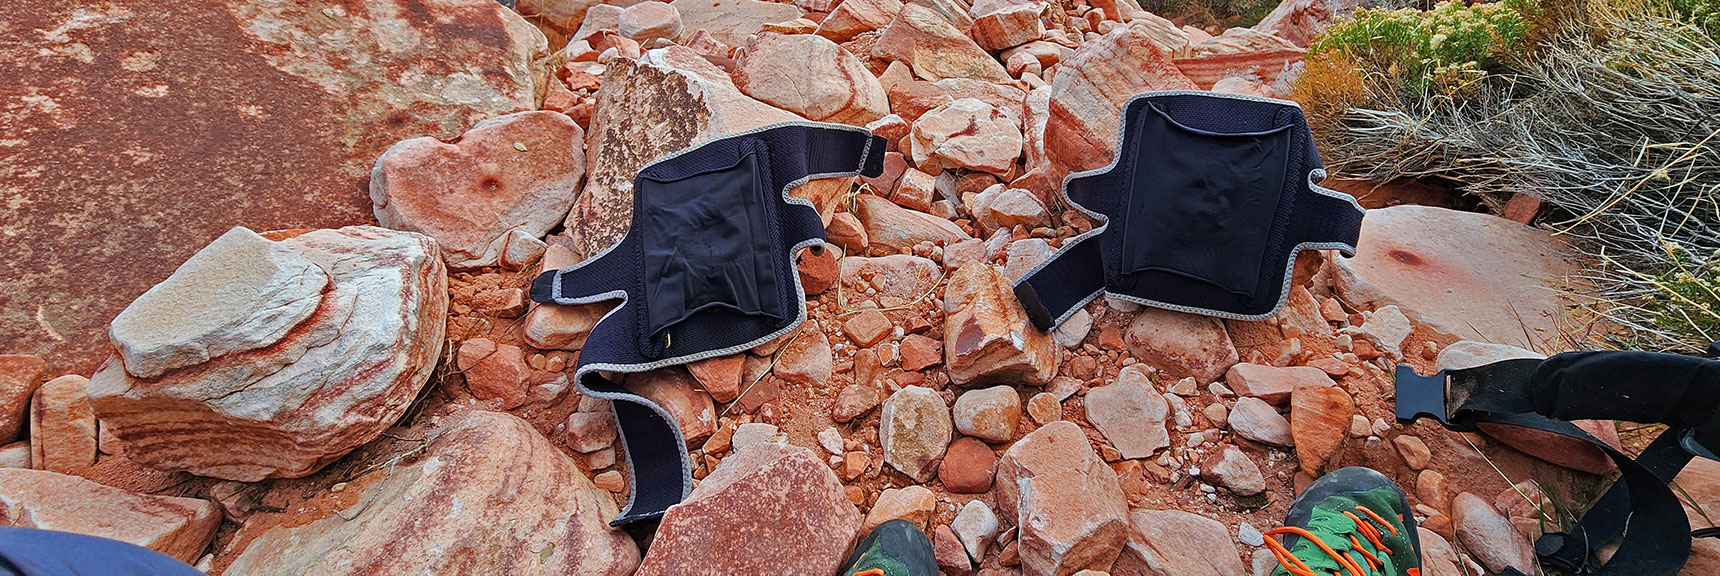 Knee Braces Add Stability, Pad Knees on Rocks, Absorb Shock. | Grand Staircase | Calico Basin, Nevada